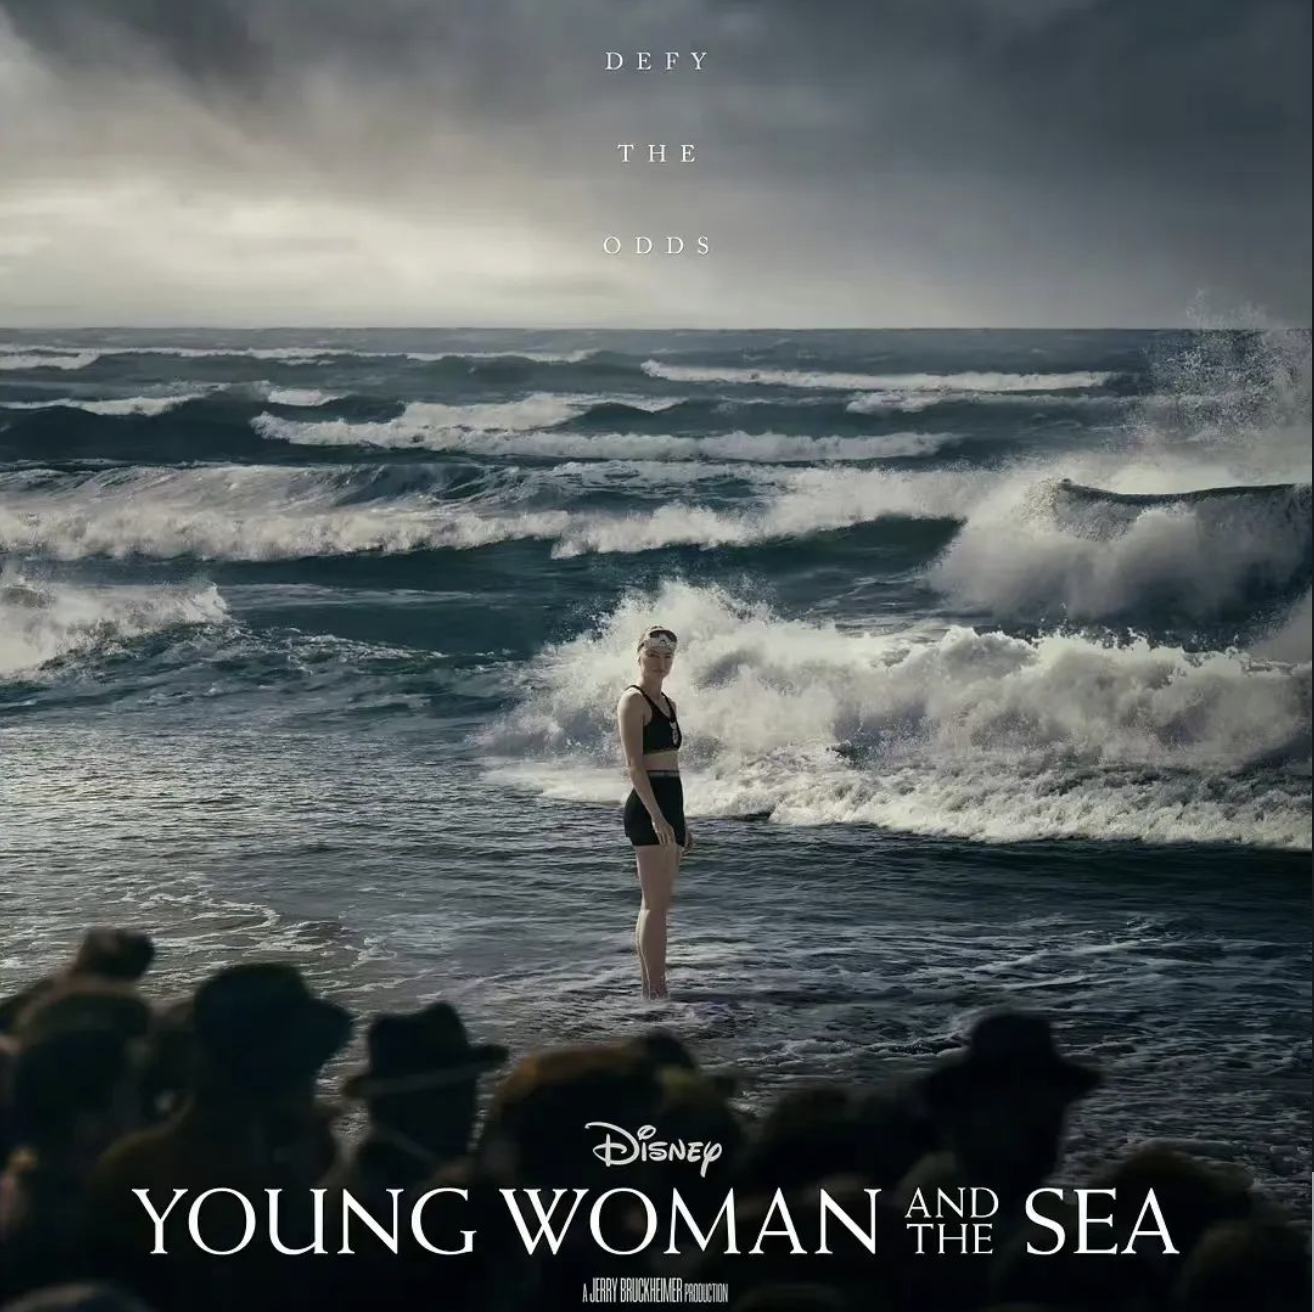 Young woman and the sea